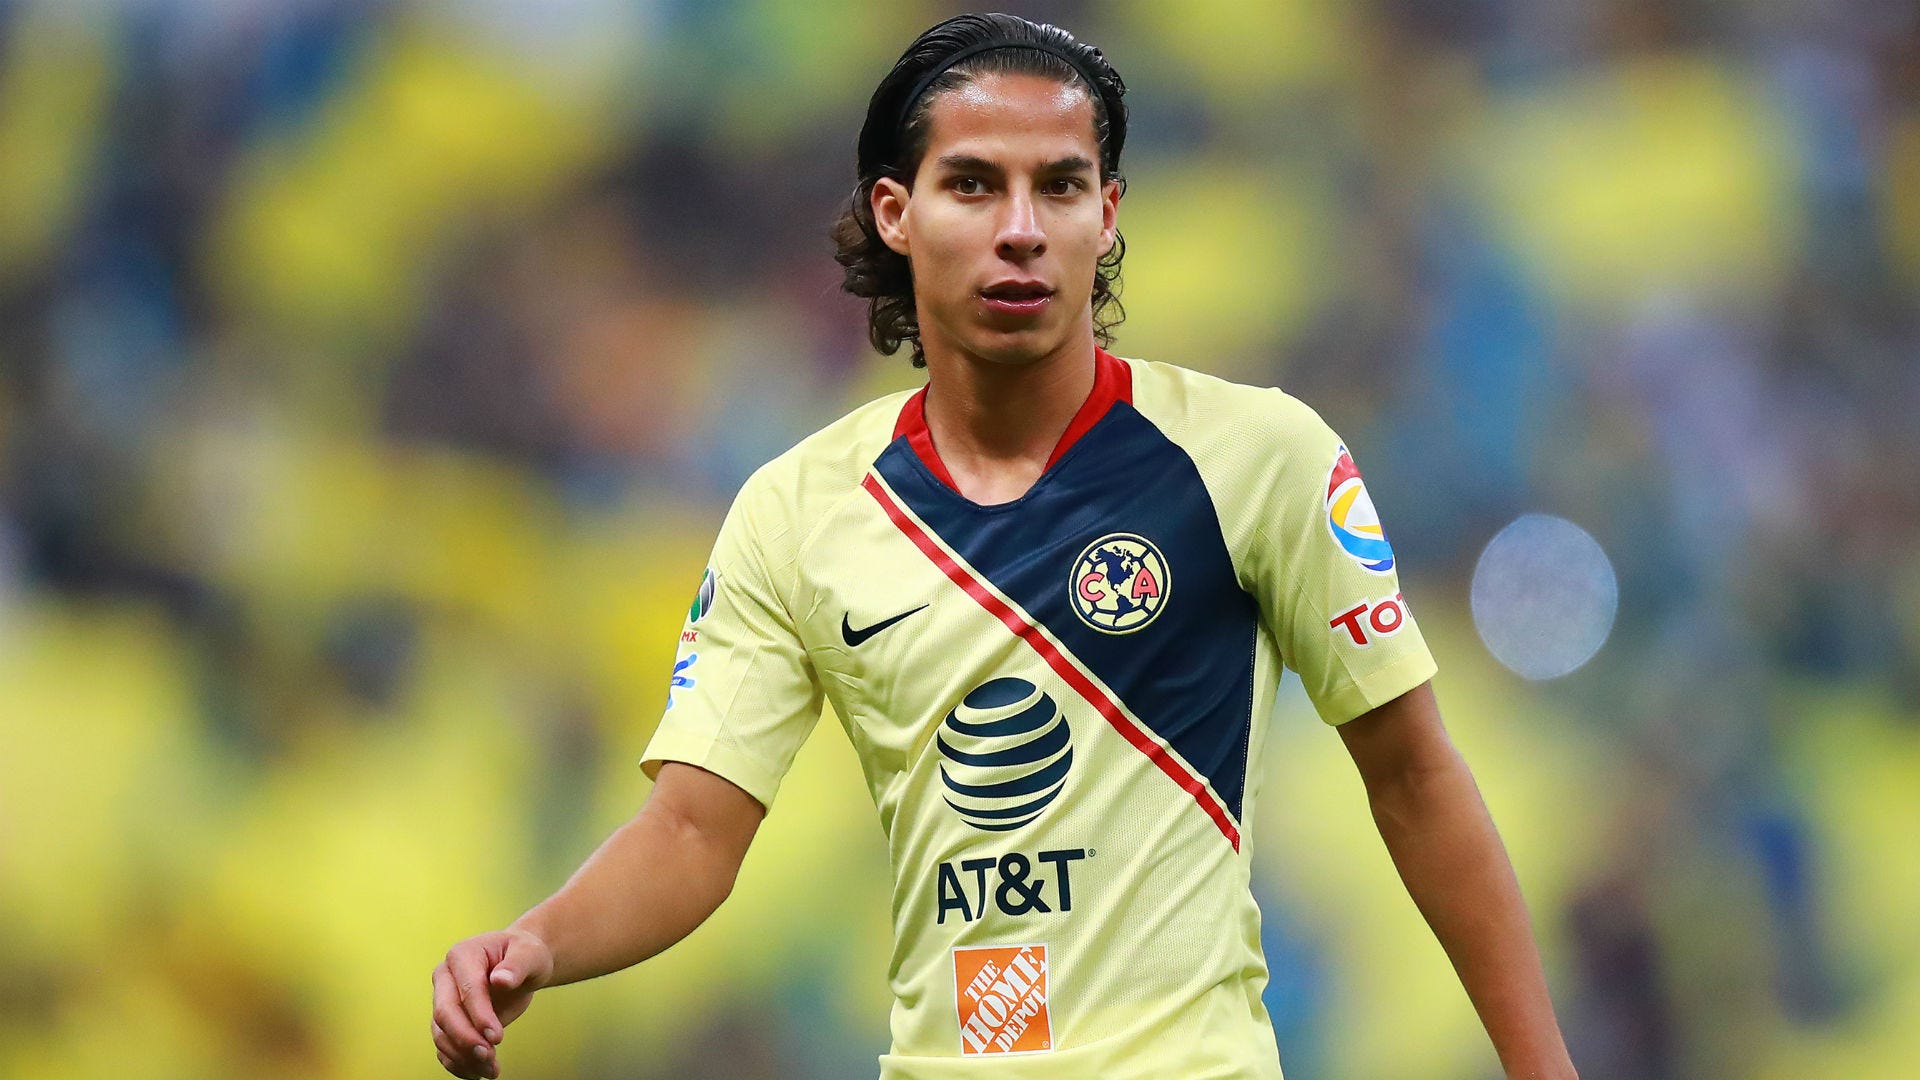 El Tri news: Mexican youngster Diego Lainez a perfect fit for Ajax - Juan  Carlos Osorio 